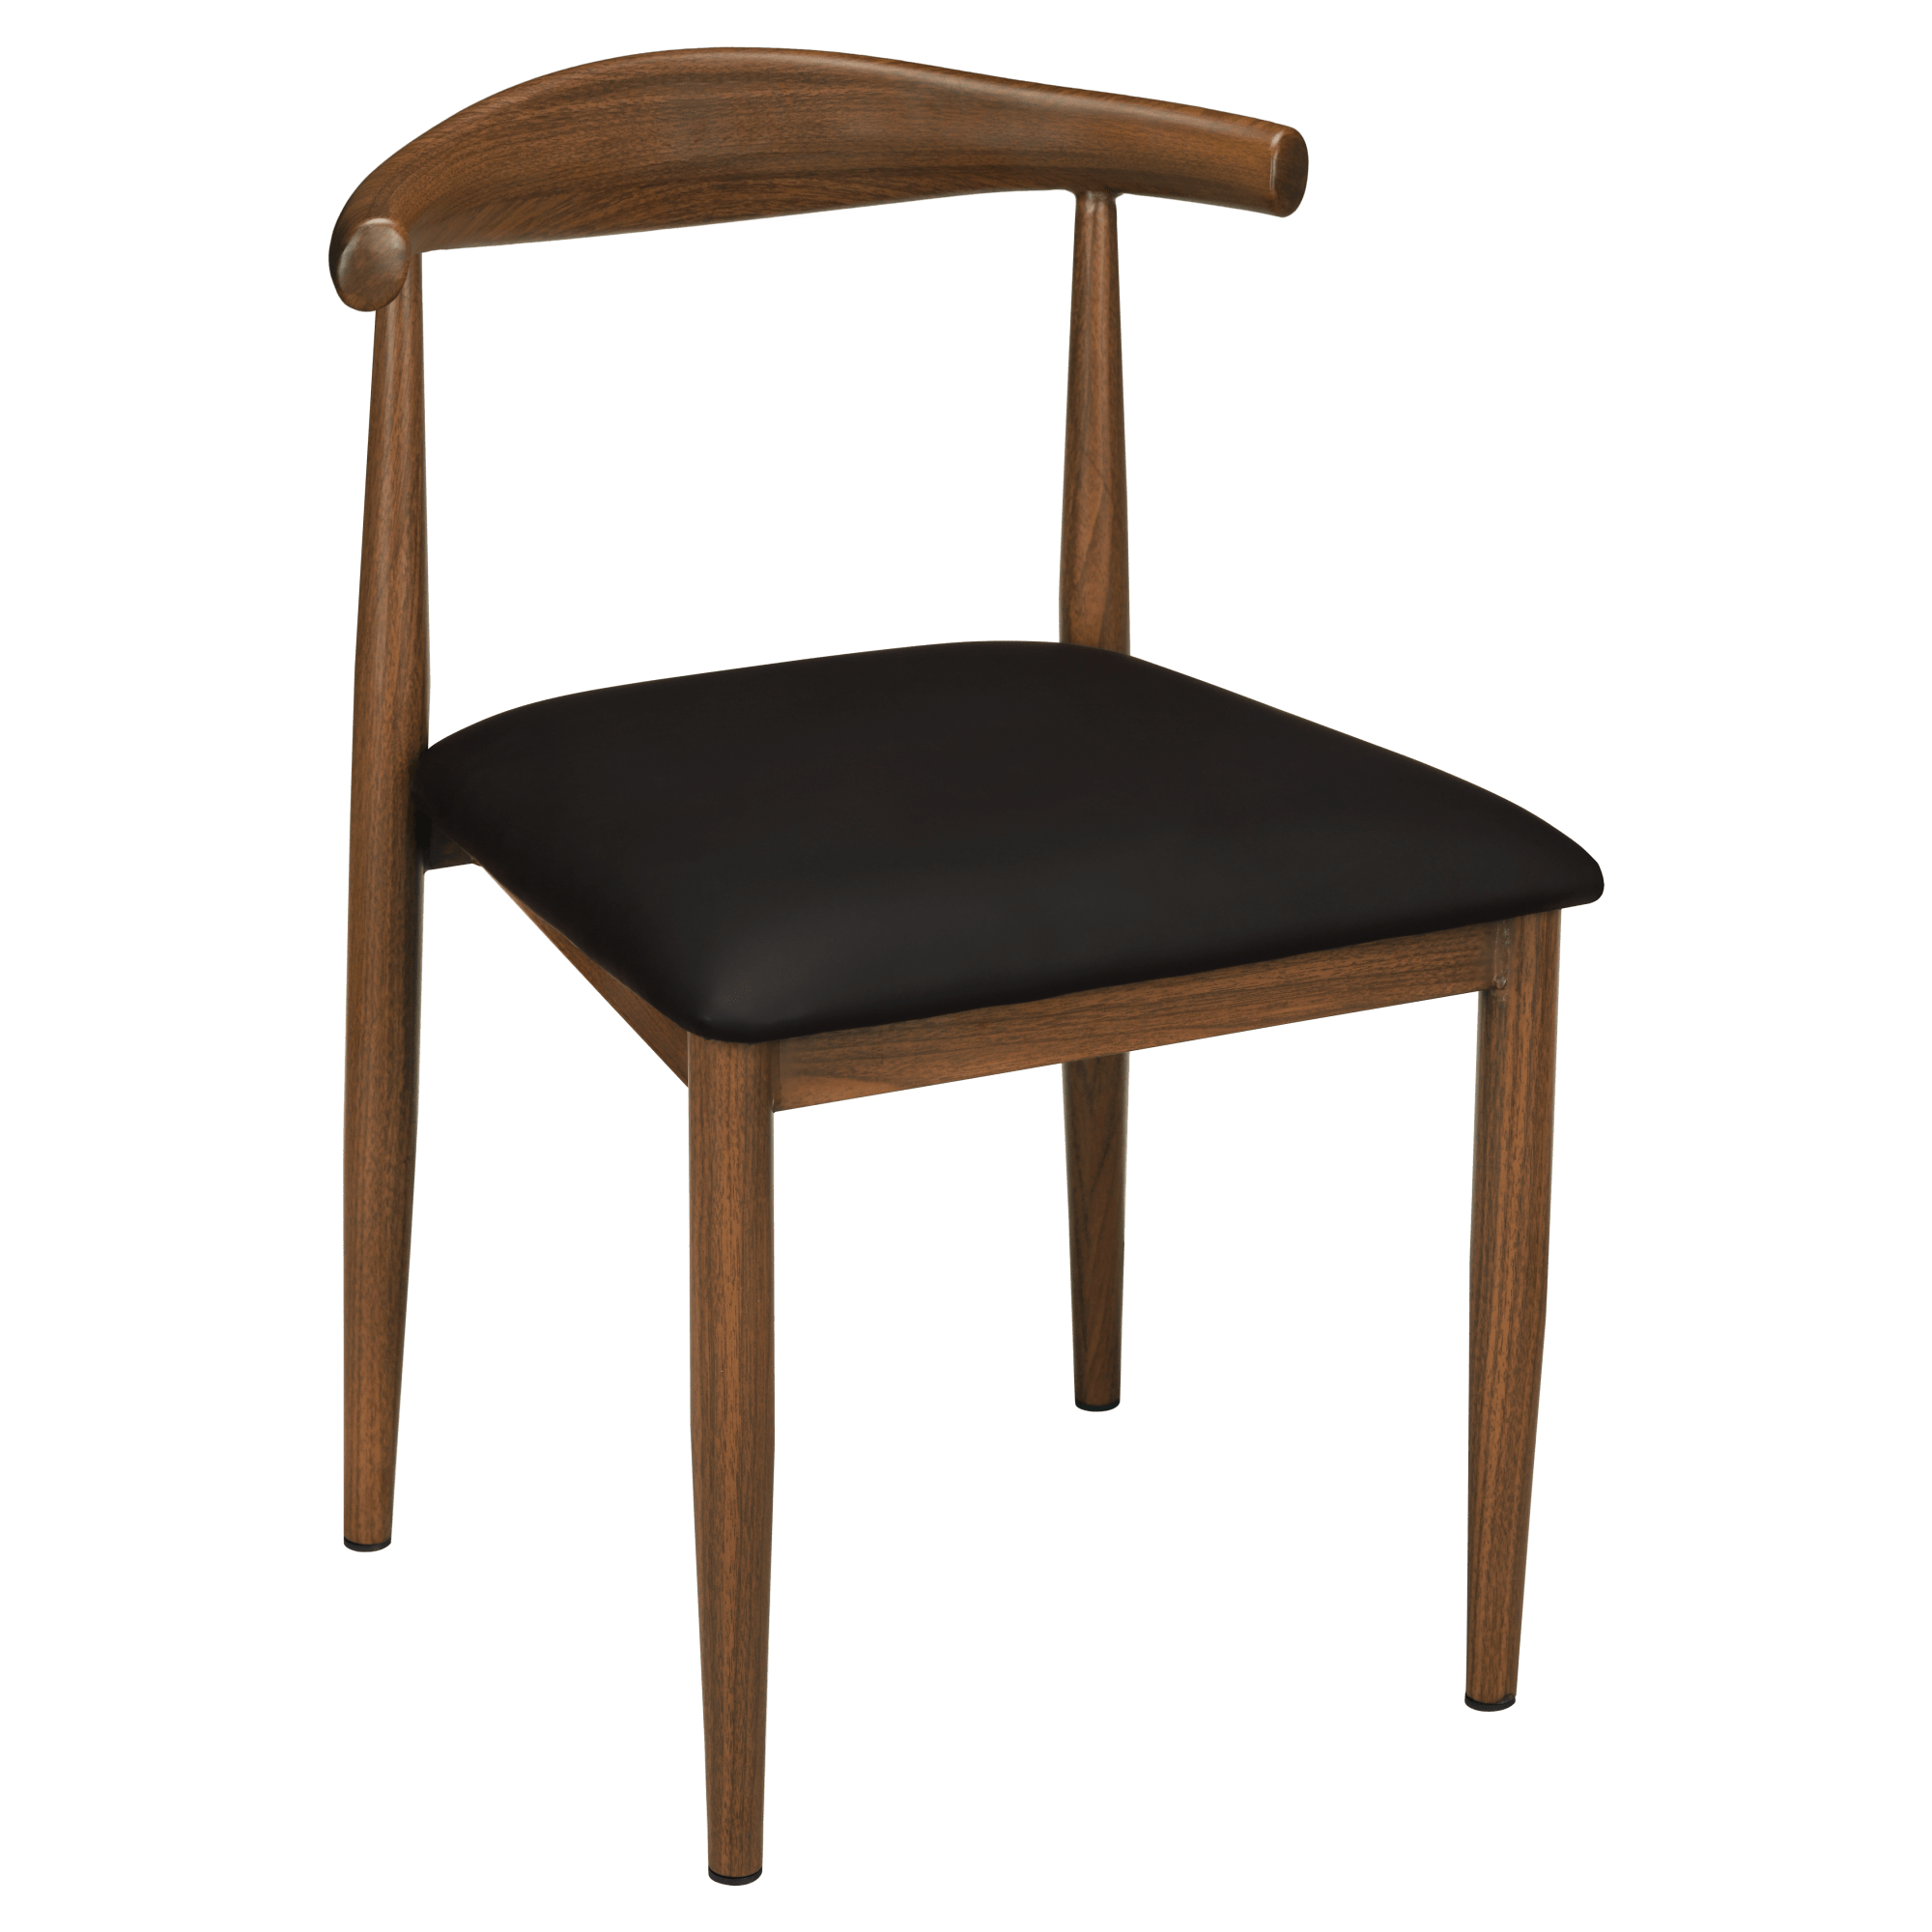 Wood Grain Metal Chair in Walnut Finish with Black Vinyl Seat with Wood Grain Metal Chair in Walnut Finish with Black Vinyl Seat